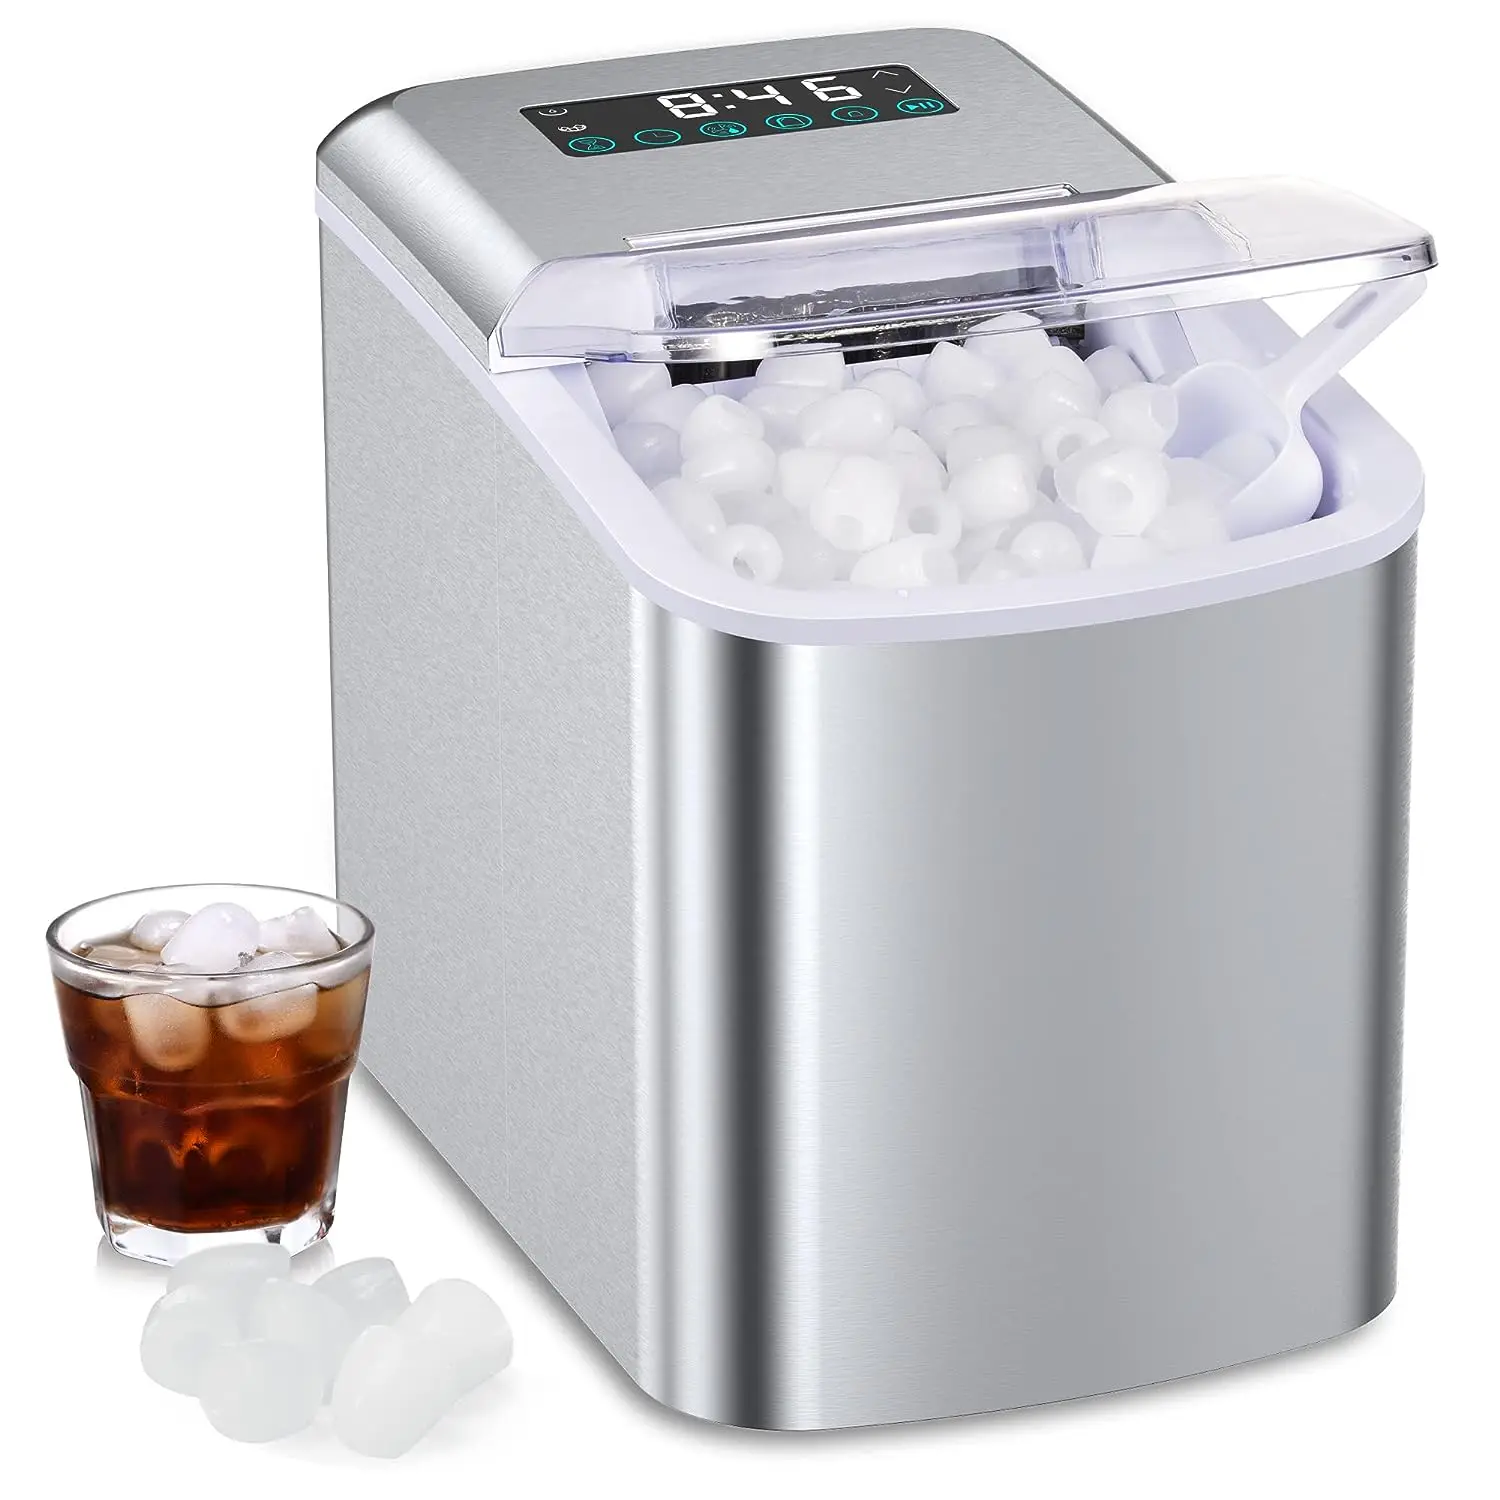 

Ice Maker Countertop, 10 Ice Cube in 8 Mins, Smart Touch Control LED Panel, Time Reservation & Countdown, Self-Cleaning, 2 S